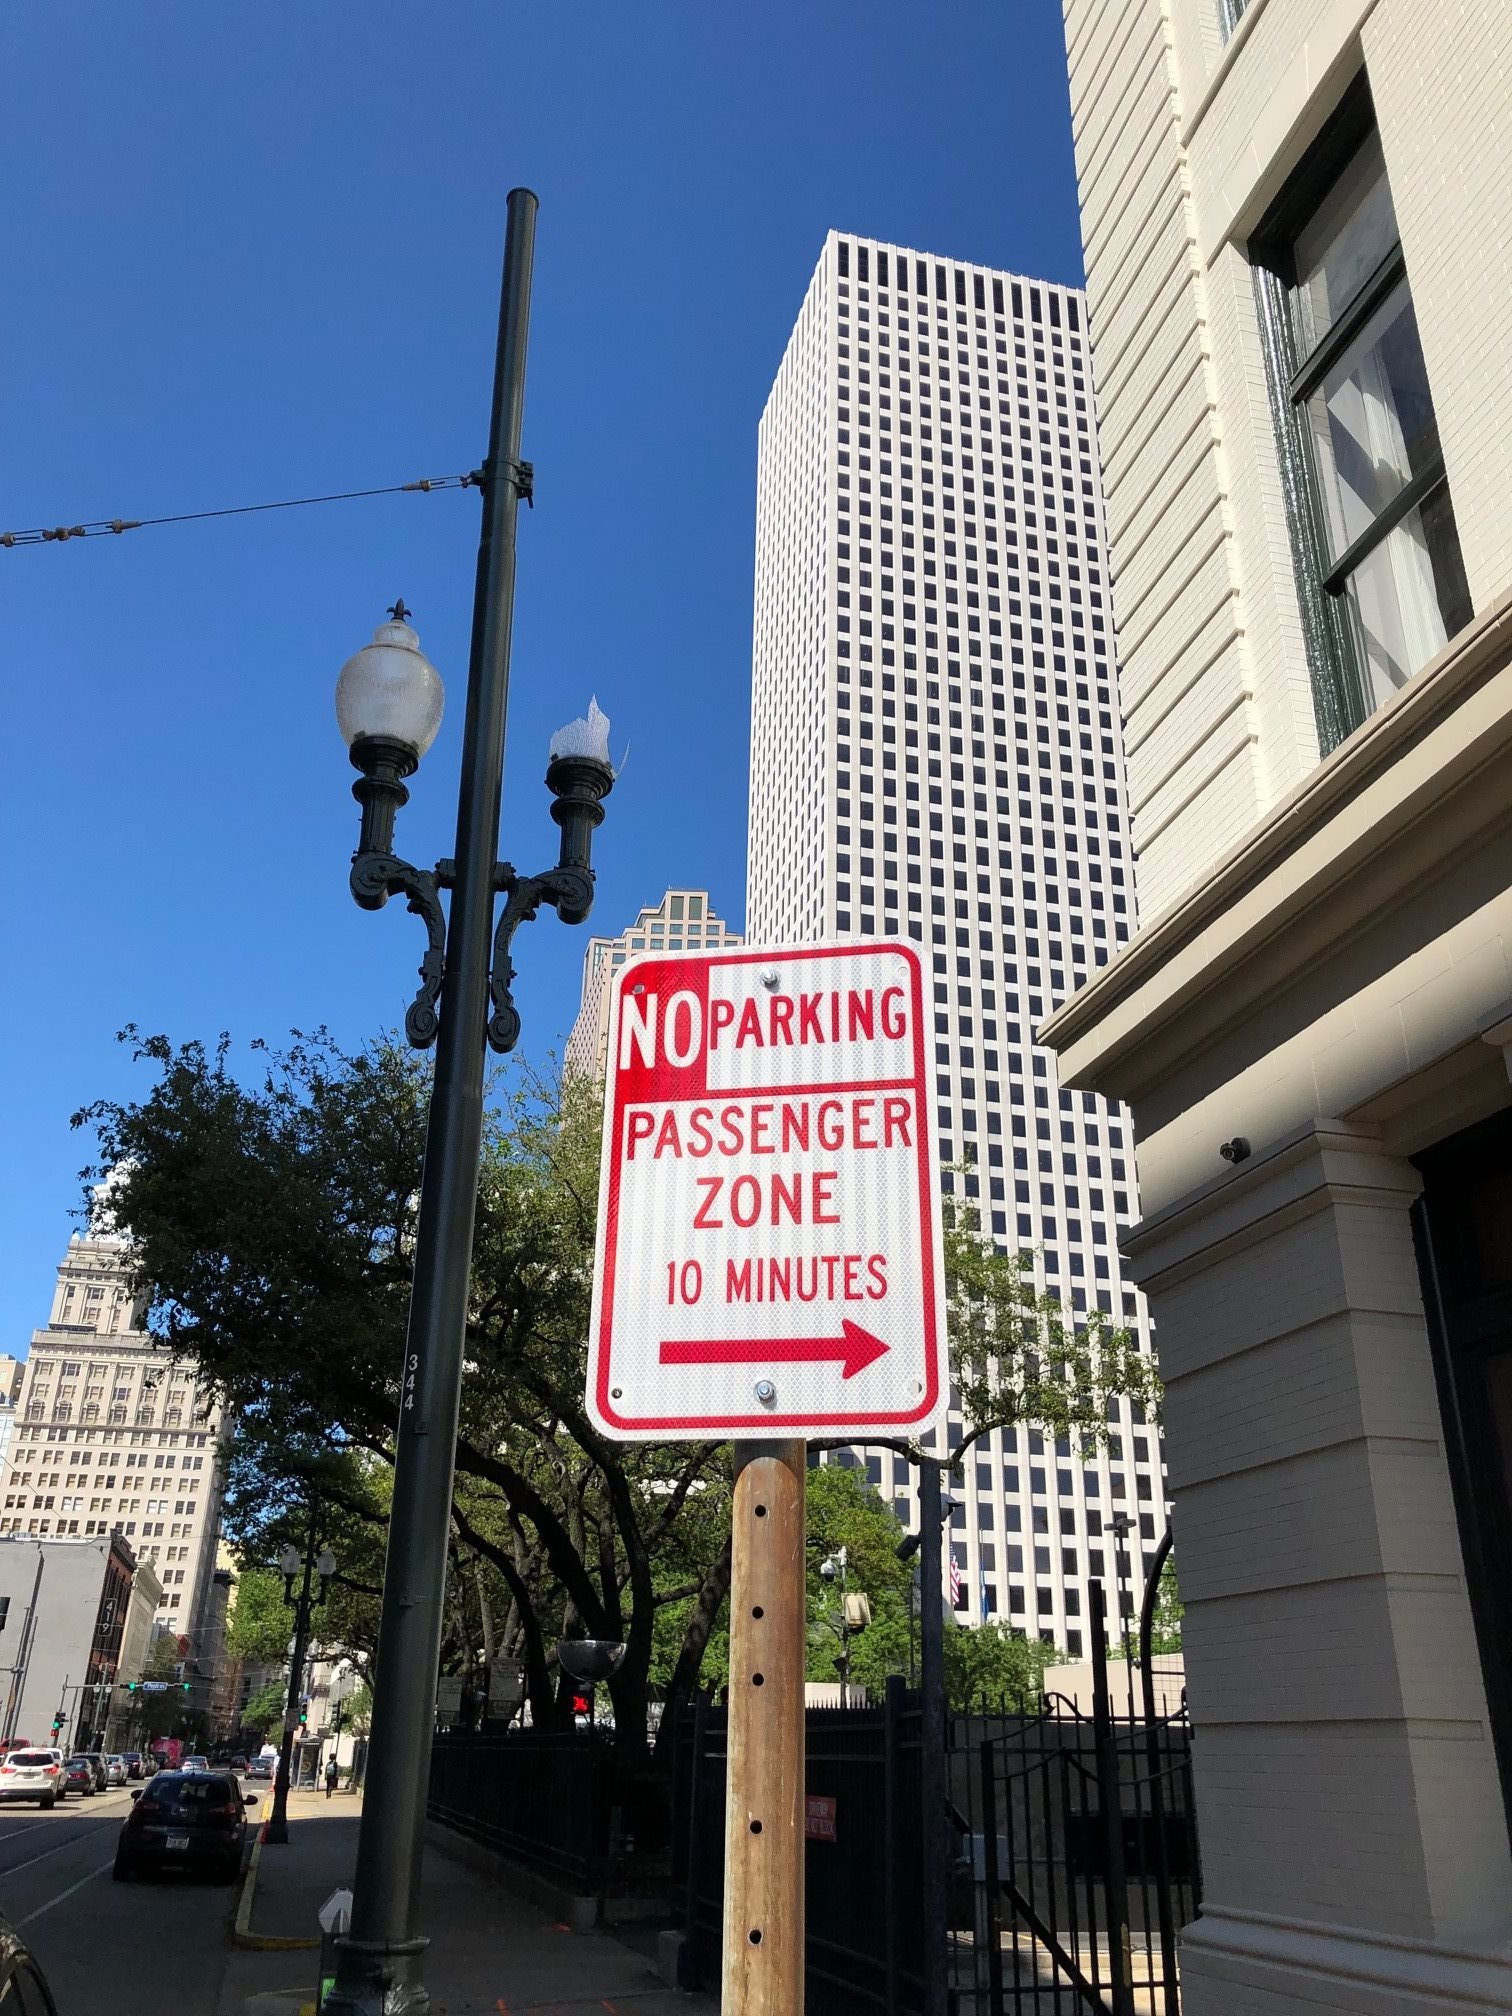 CITY BEGINS INSTALLING NEW SIGNAGE DOWNTOWN FOLLOWING STUDY